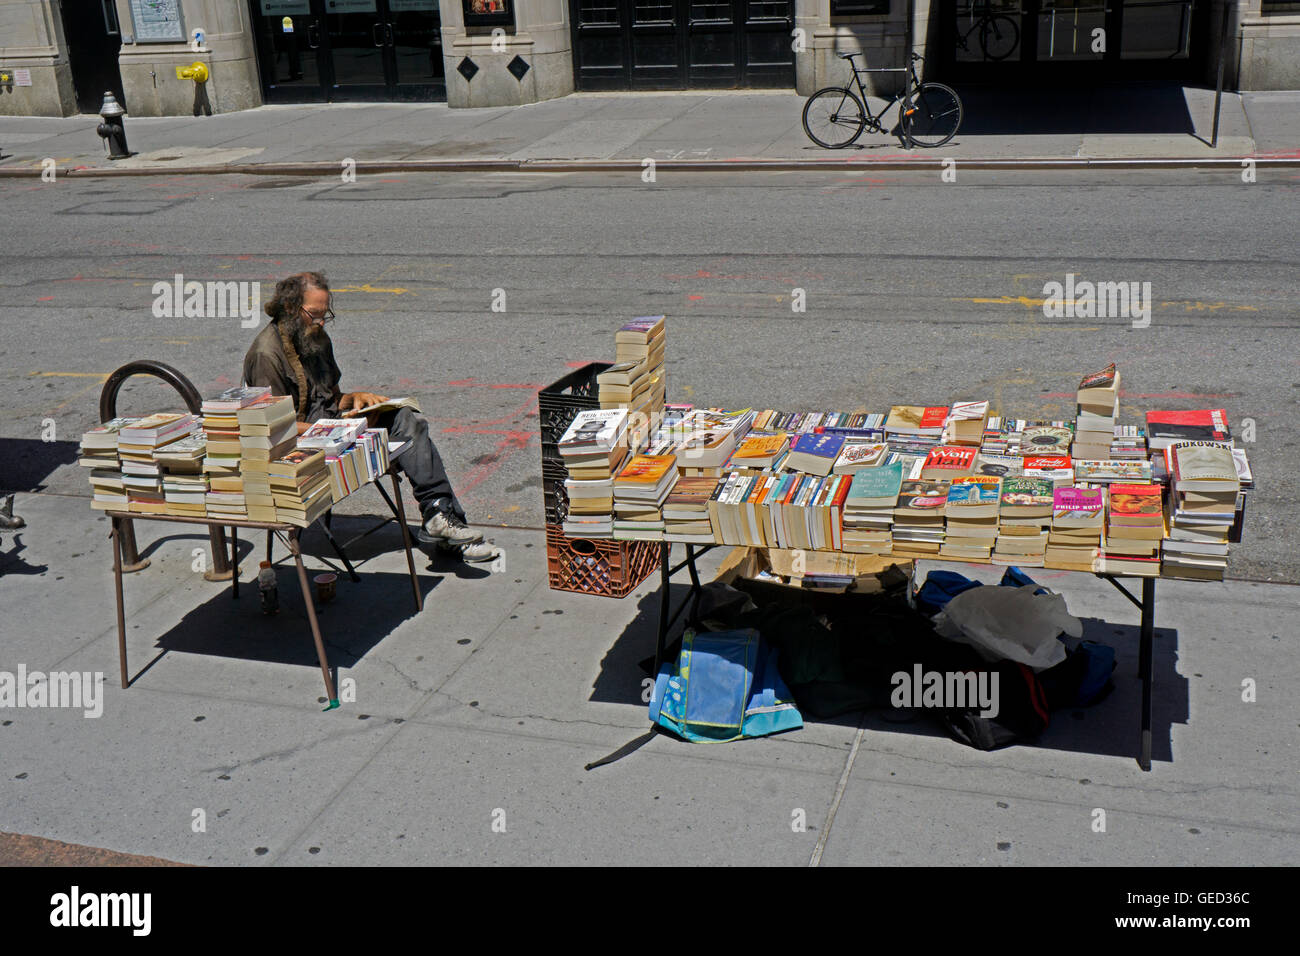 A middle aged man with a beard selling used books on West 4th Street in Greenwich Village near New York University. Stock Photo